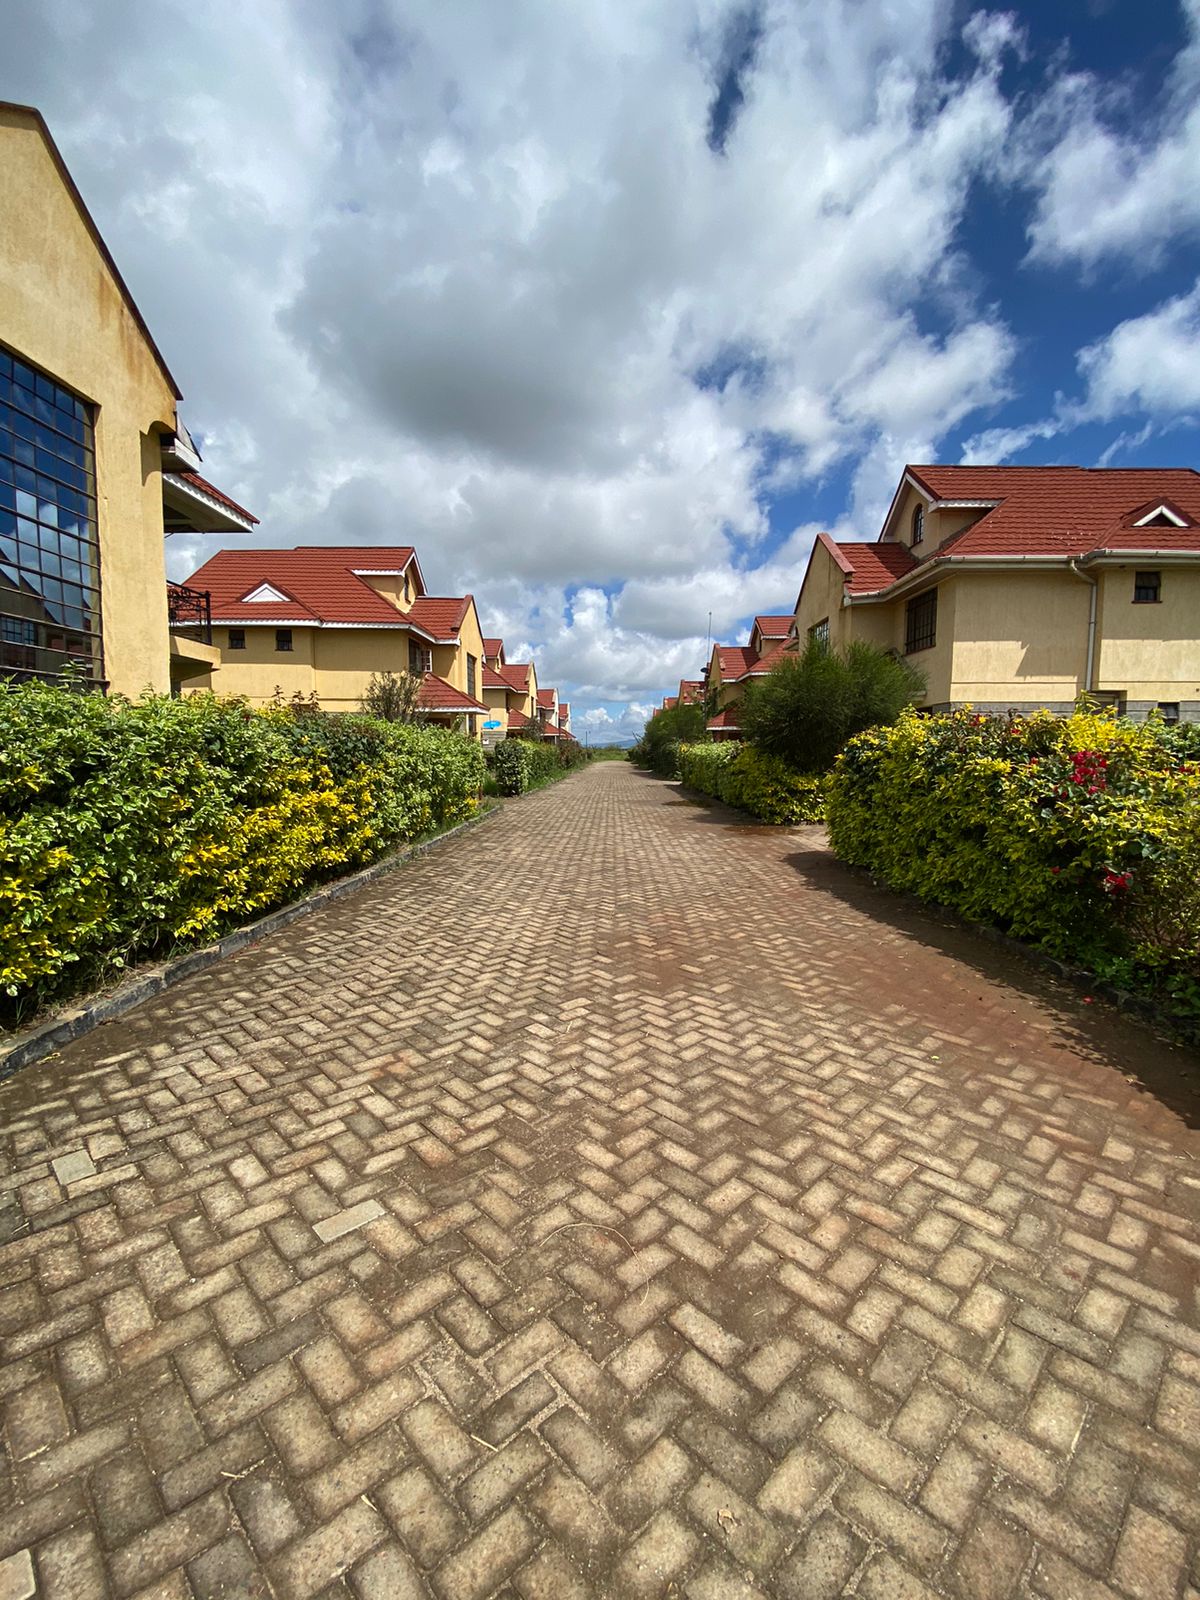 Exquisite 4 bedroom plus dsq mansionette in a gated community of 22 houses for sale. 2km off Thika superhighway. Price Ksh 15 million Musilli Homes